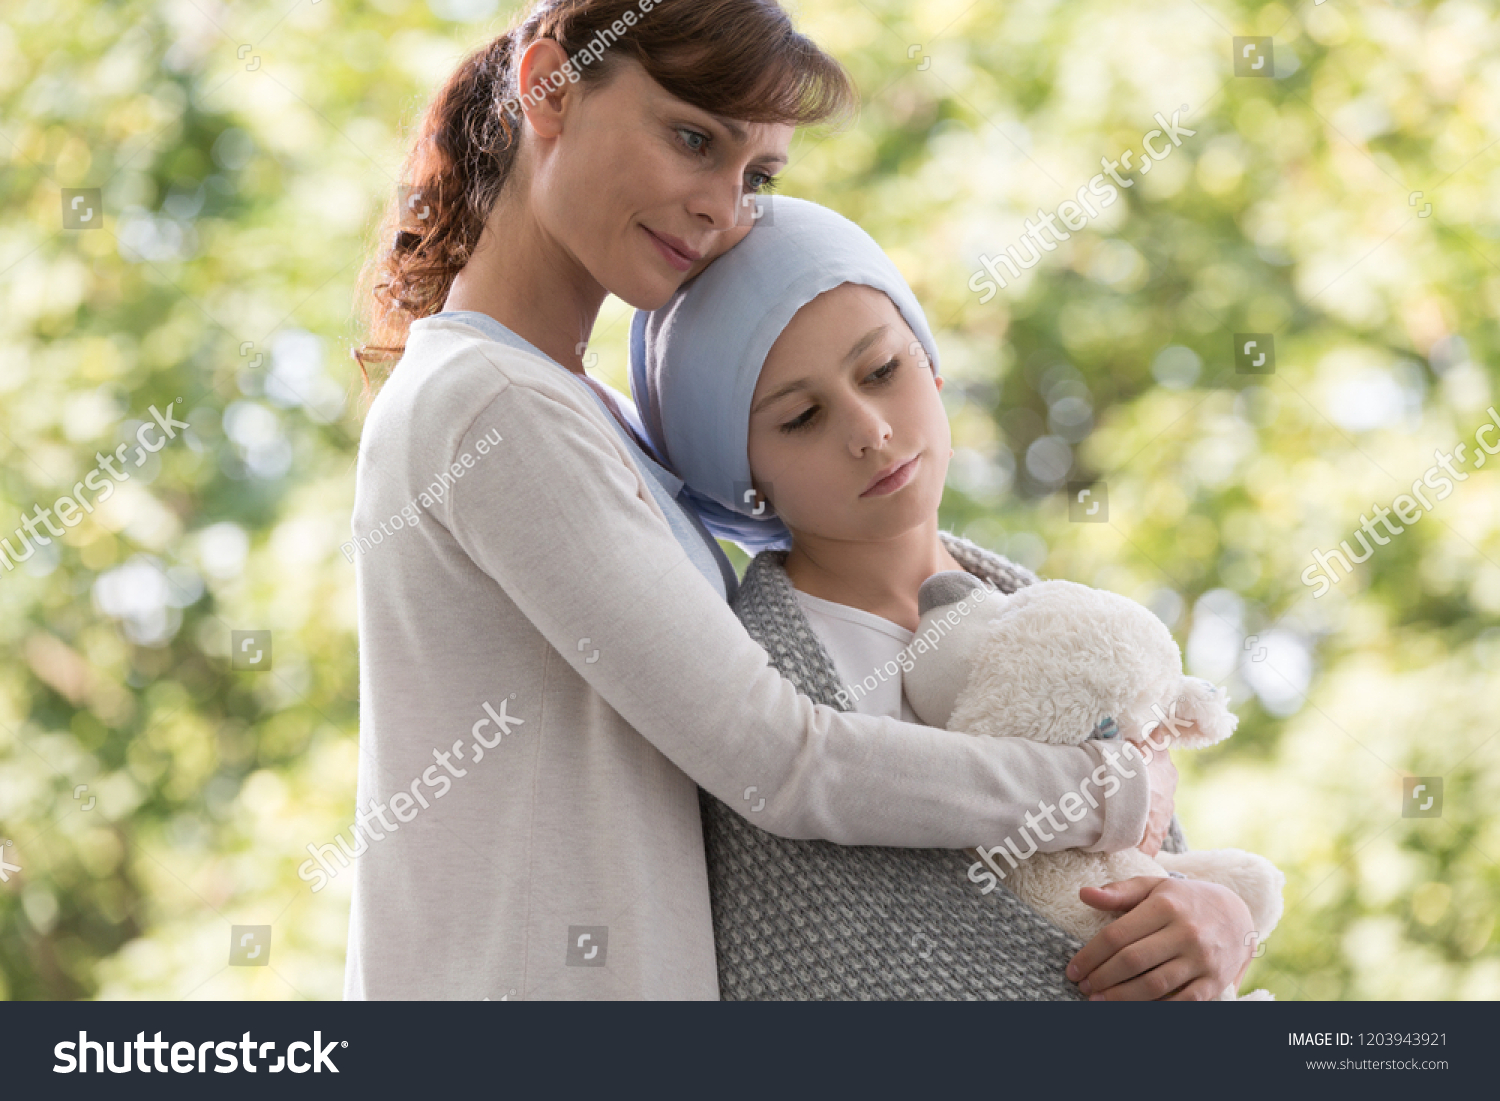 Mother hugging sad daughter with cancer #1203943921